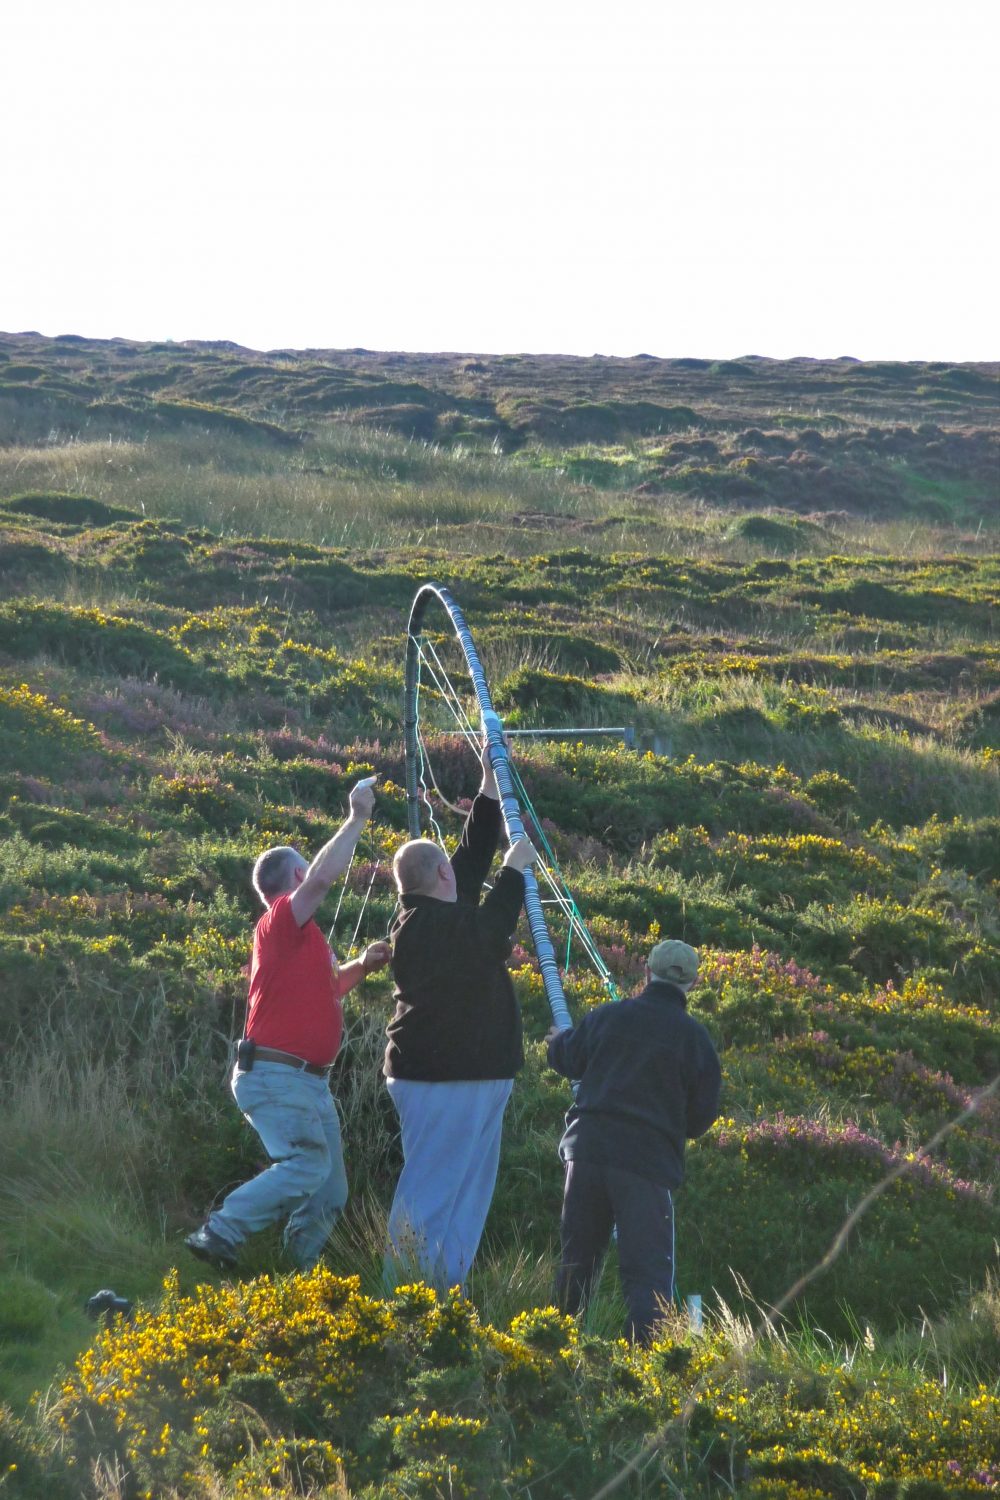 2009, Steve Kelly (GD7DUZ), John Parslow (GD4UHB) and Unknown playing with Antenna's Behind Eary Cushlin.